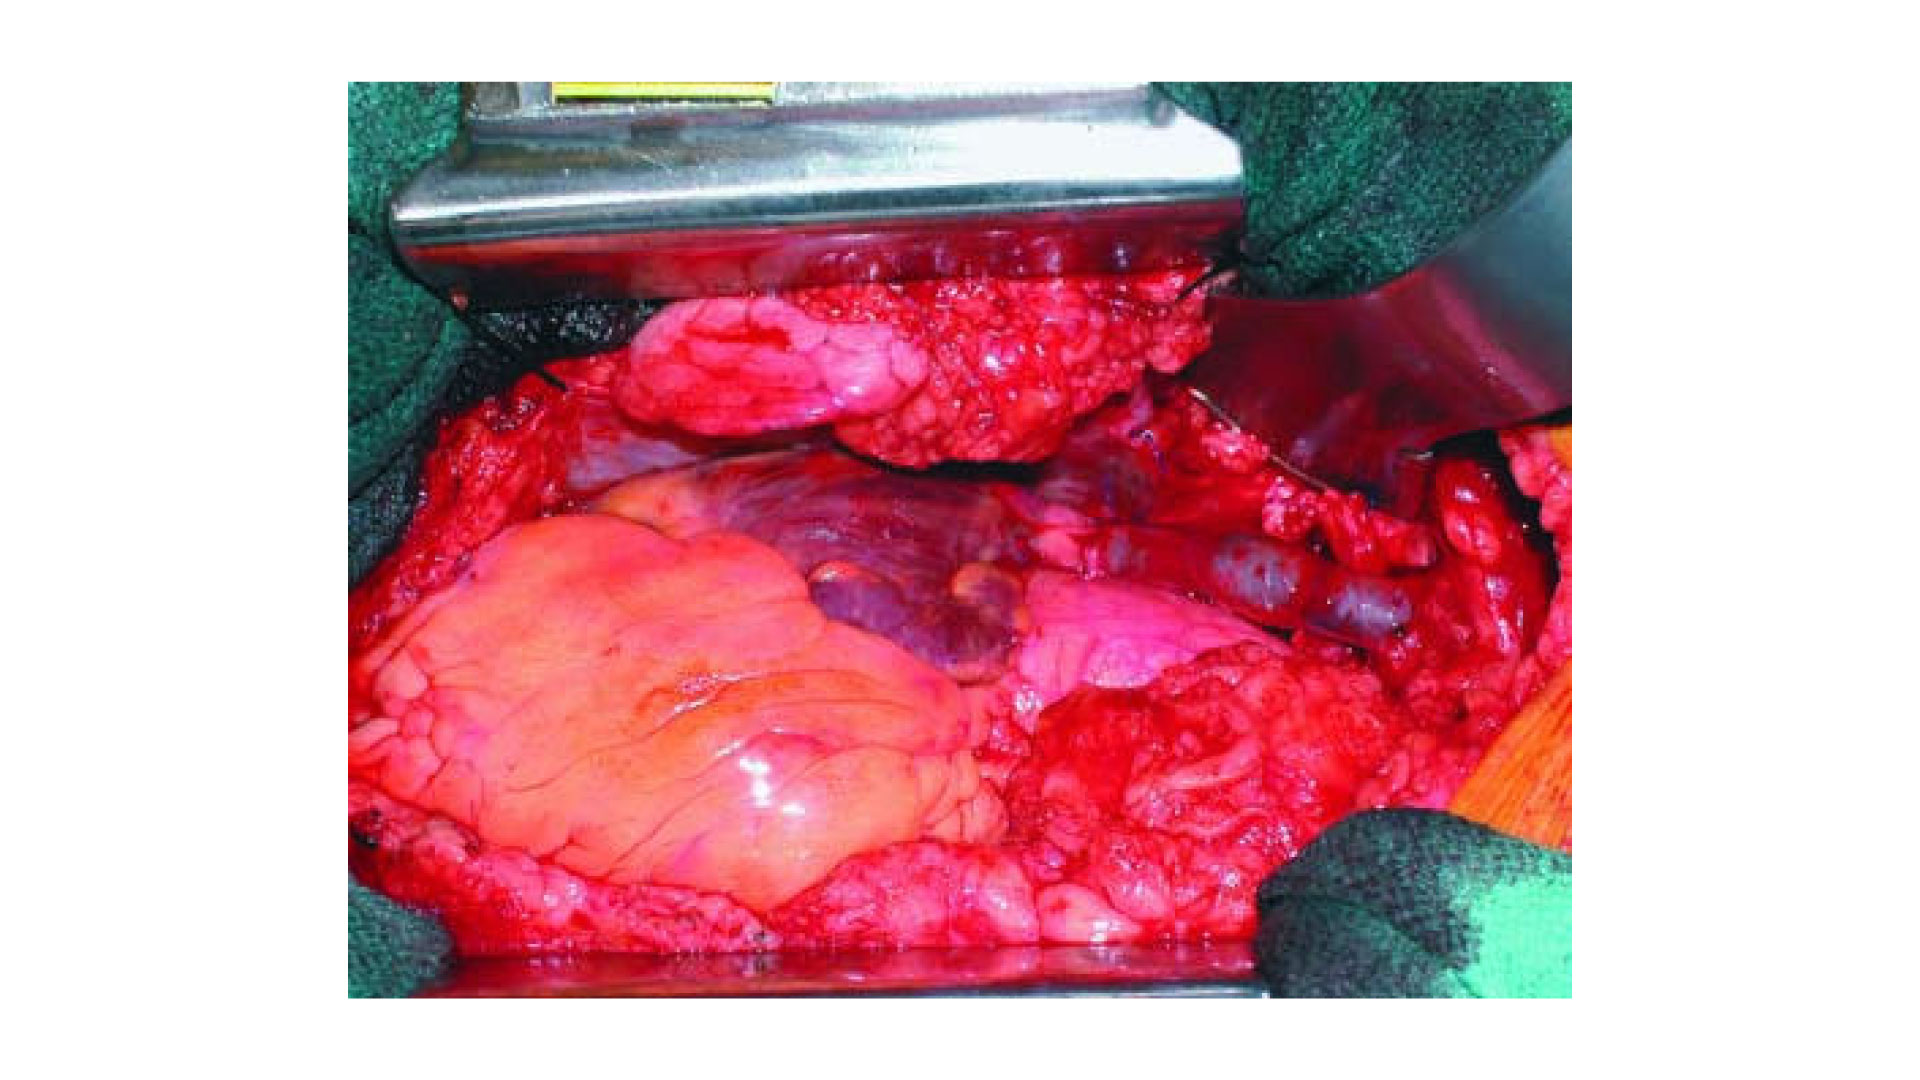 Superior vena caval bypass using the superficial femoral vein for treatment of superior vena cava syndrome